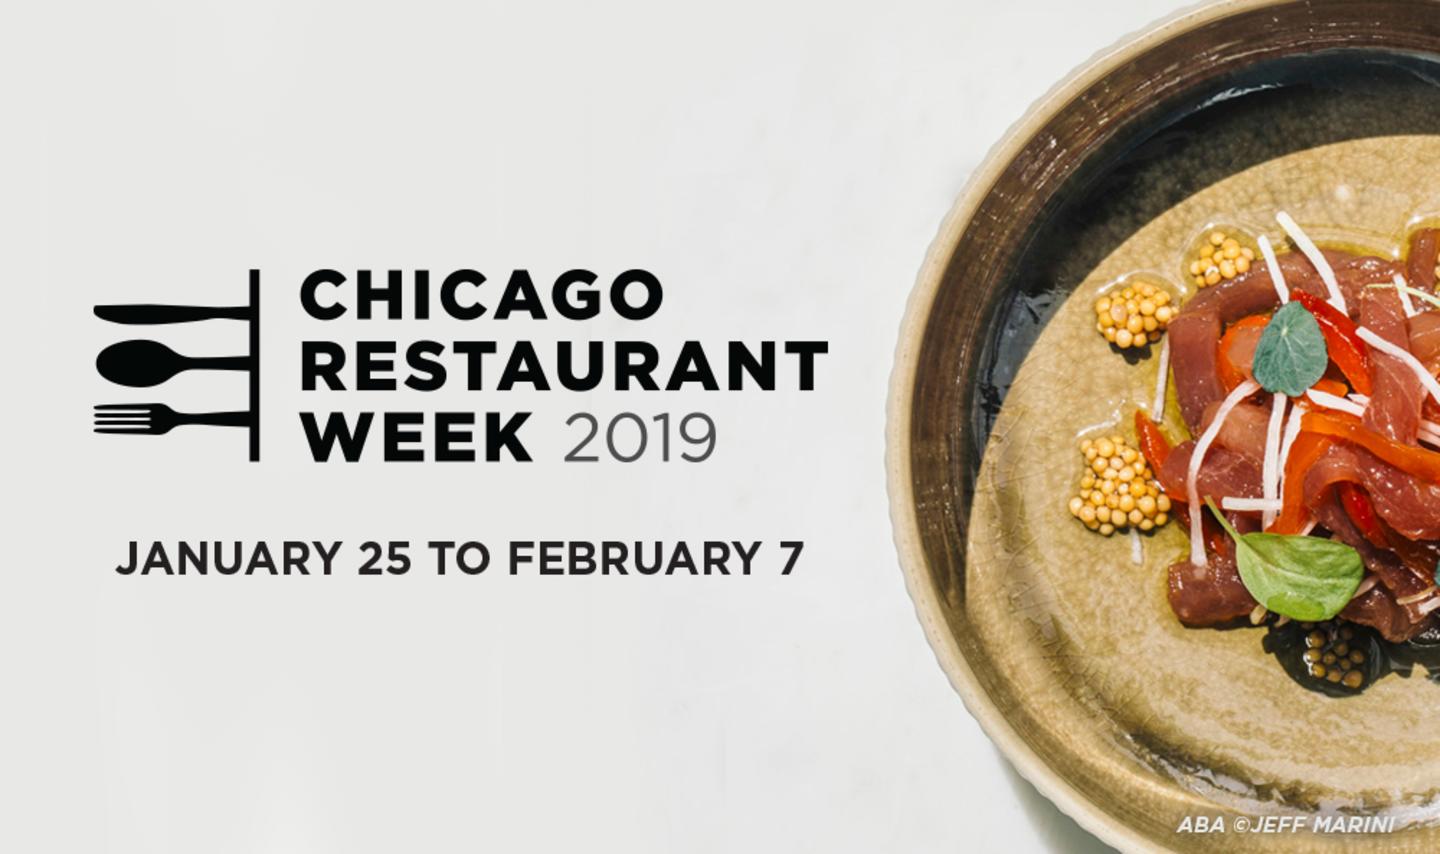 Chicago Restaurant Week  The Magnificent Mile - Restaurant Week Chicago